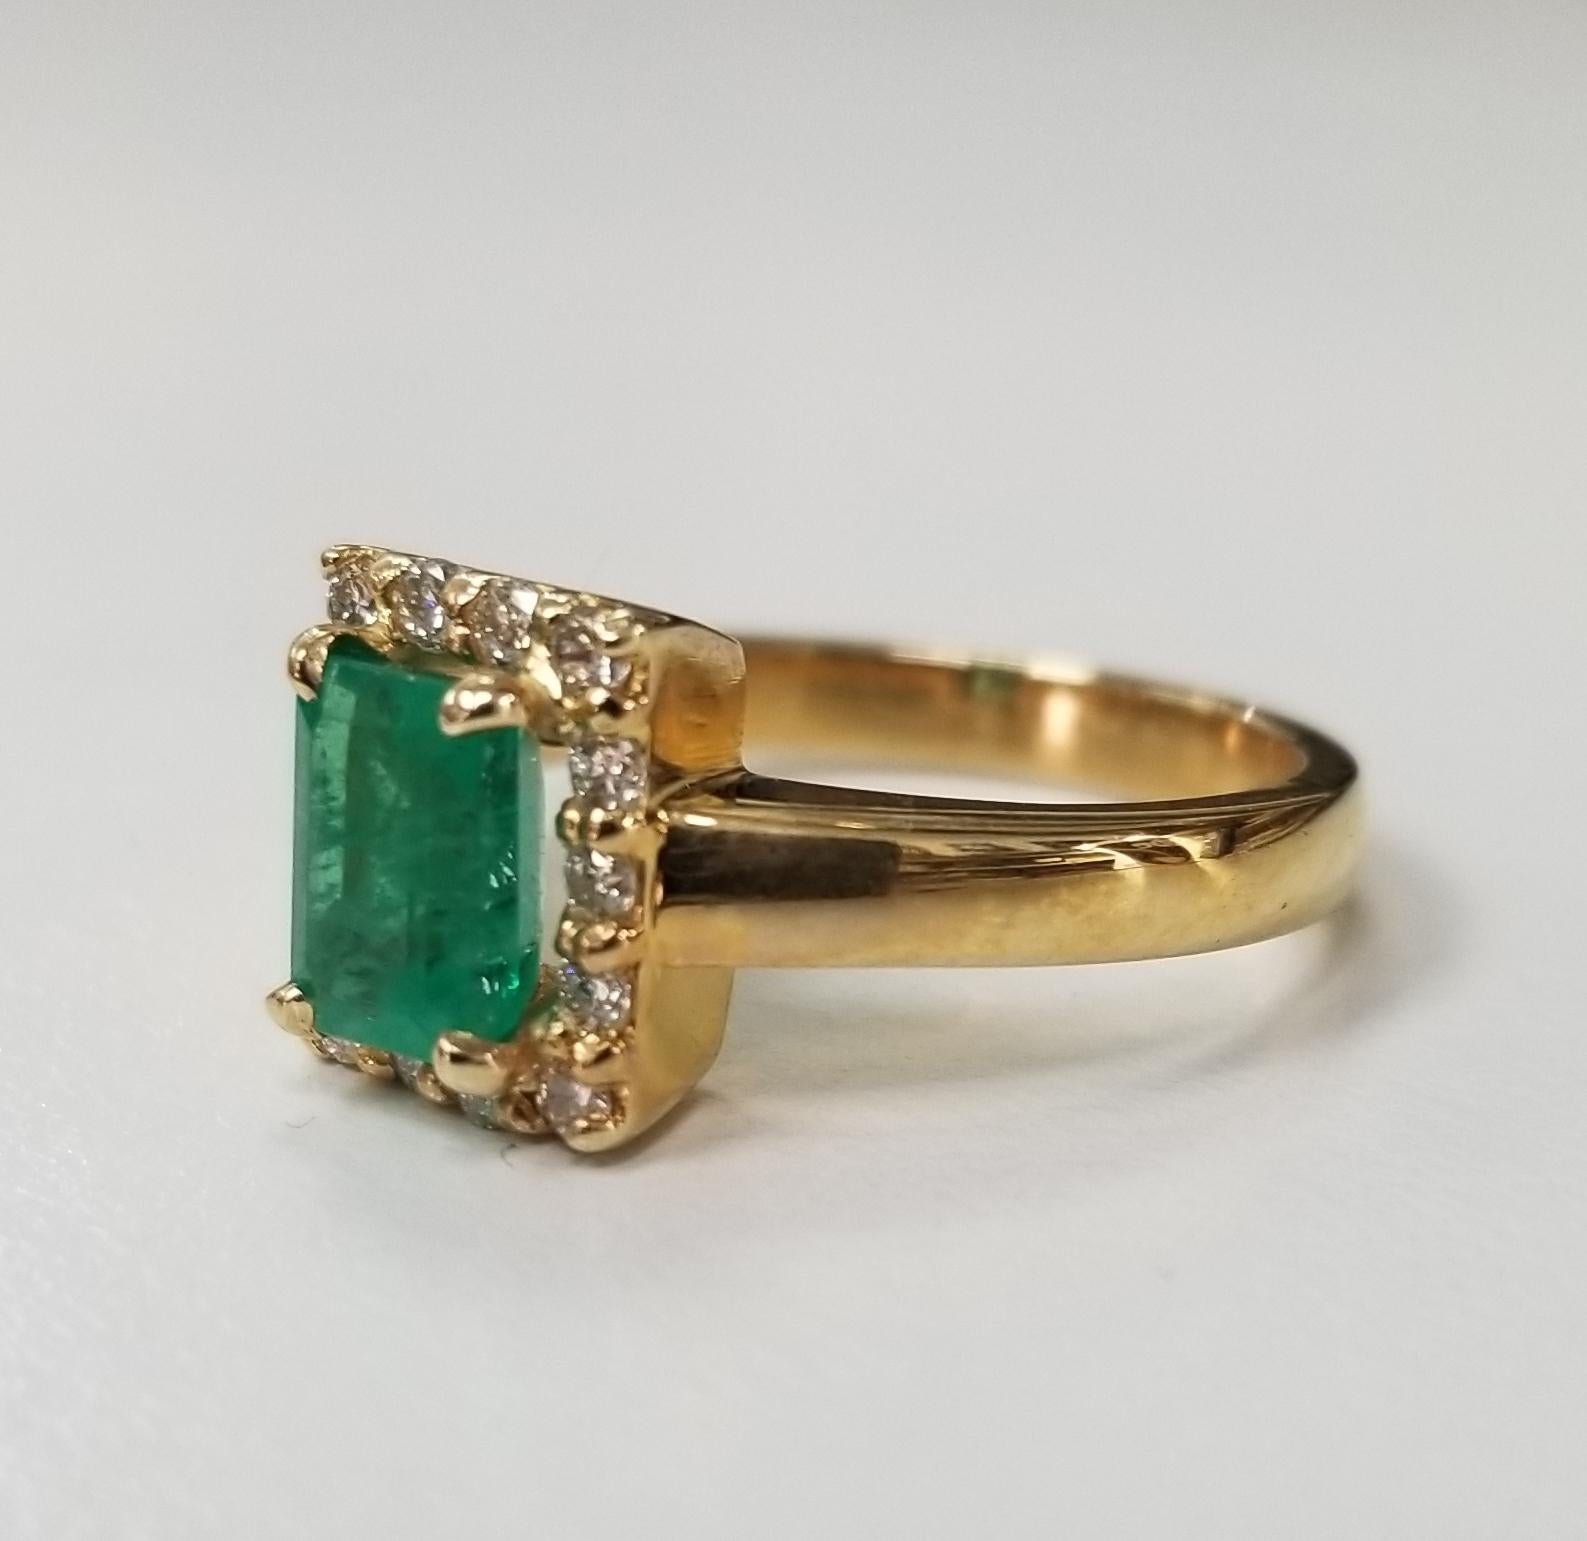 14k yellow gold emerald and diamond ring, containing 1 emerald cut emerald weighing 1.13cts. and 16 round full cut diamonds of very fine quality weighing .30pts.  This ring is a size 6.5 but we will size to fit for free.